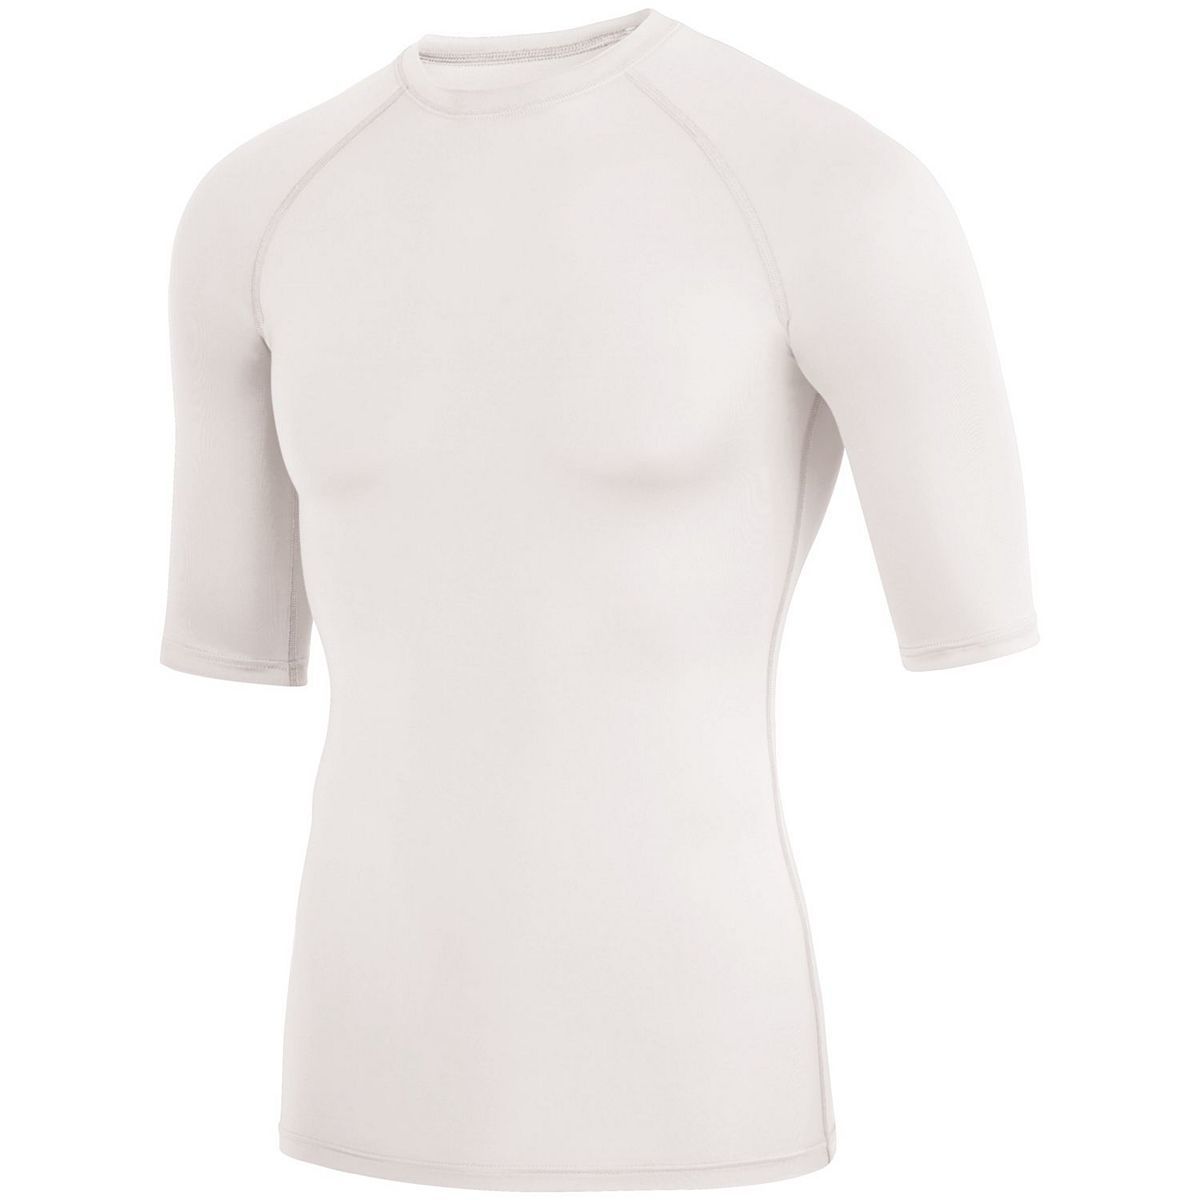 Augusta Sportswear Hyperform Compression Half Sleeve Tee in White  -Part of the Adult, Adult-Tee-Shirt, T-Shirts, Augusta-Products, Shirts product lines at KanaleyCreations.com